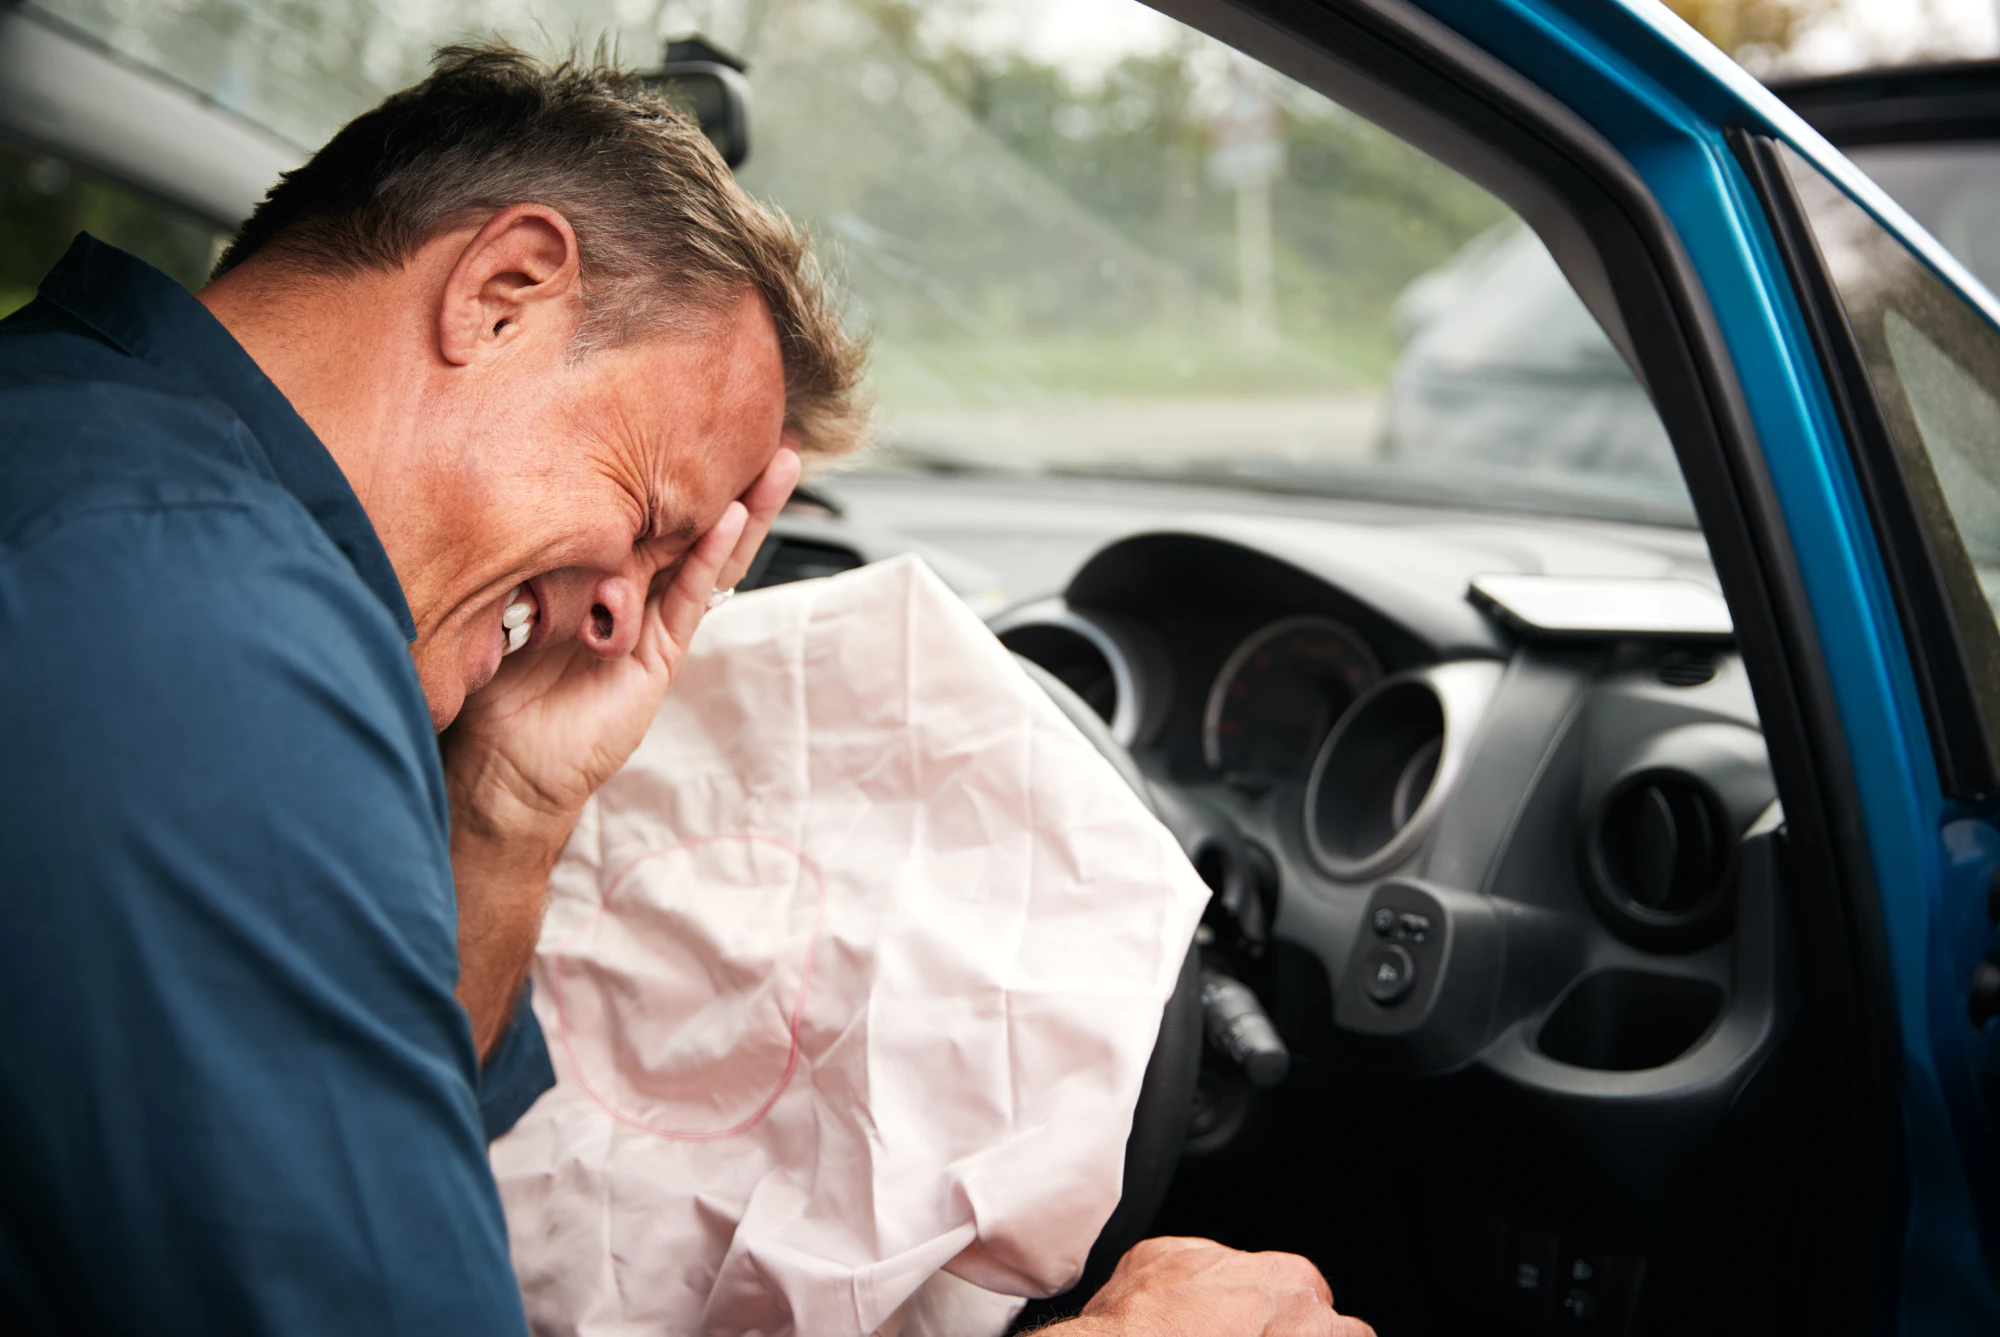 Can you sue for airbag injuries? Photo of man in pain hit by airbag.